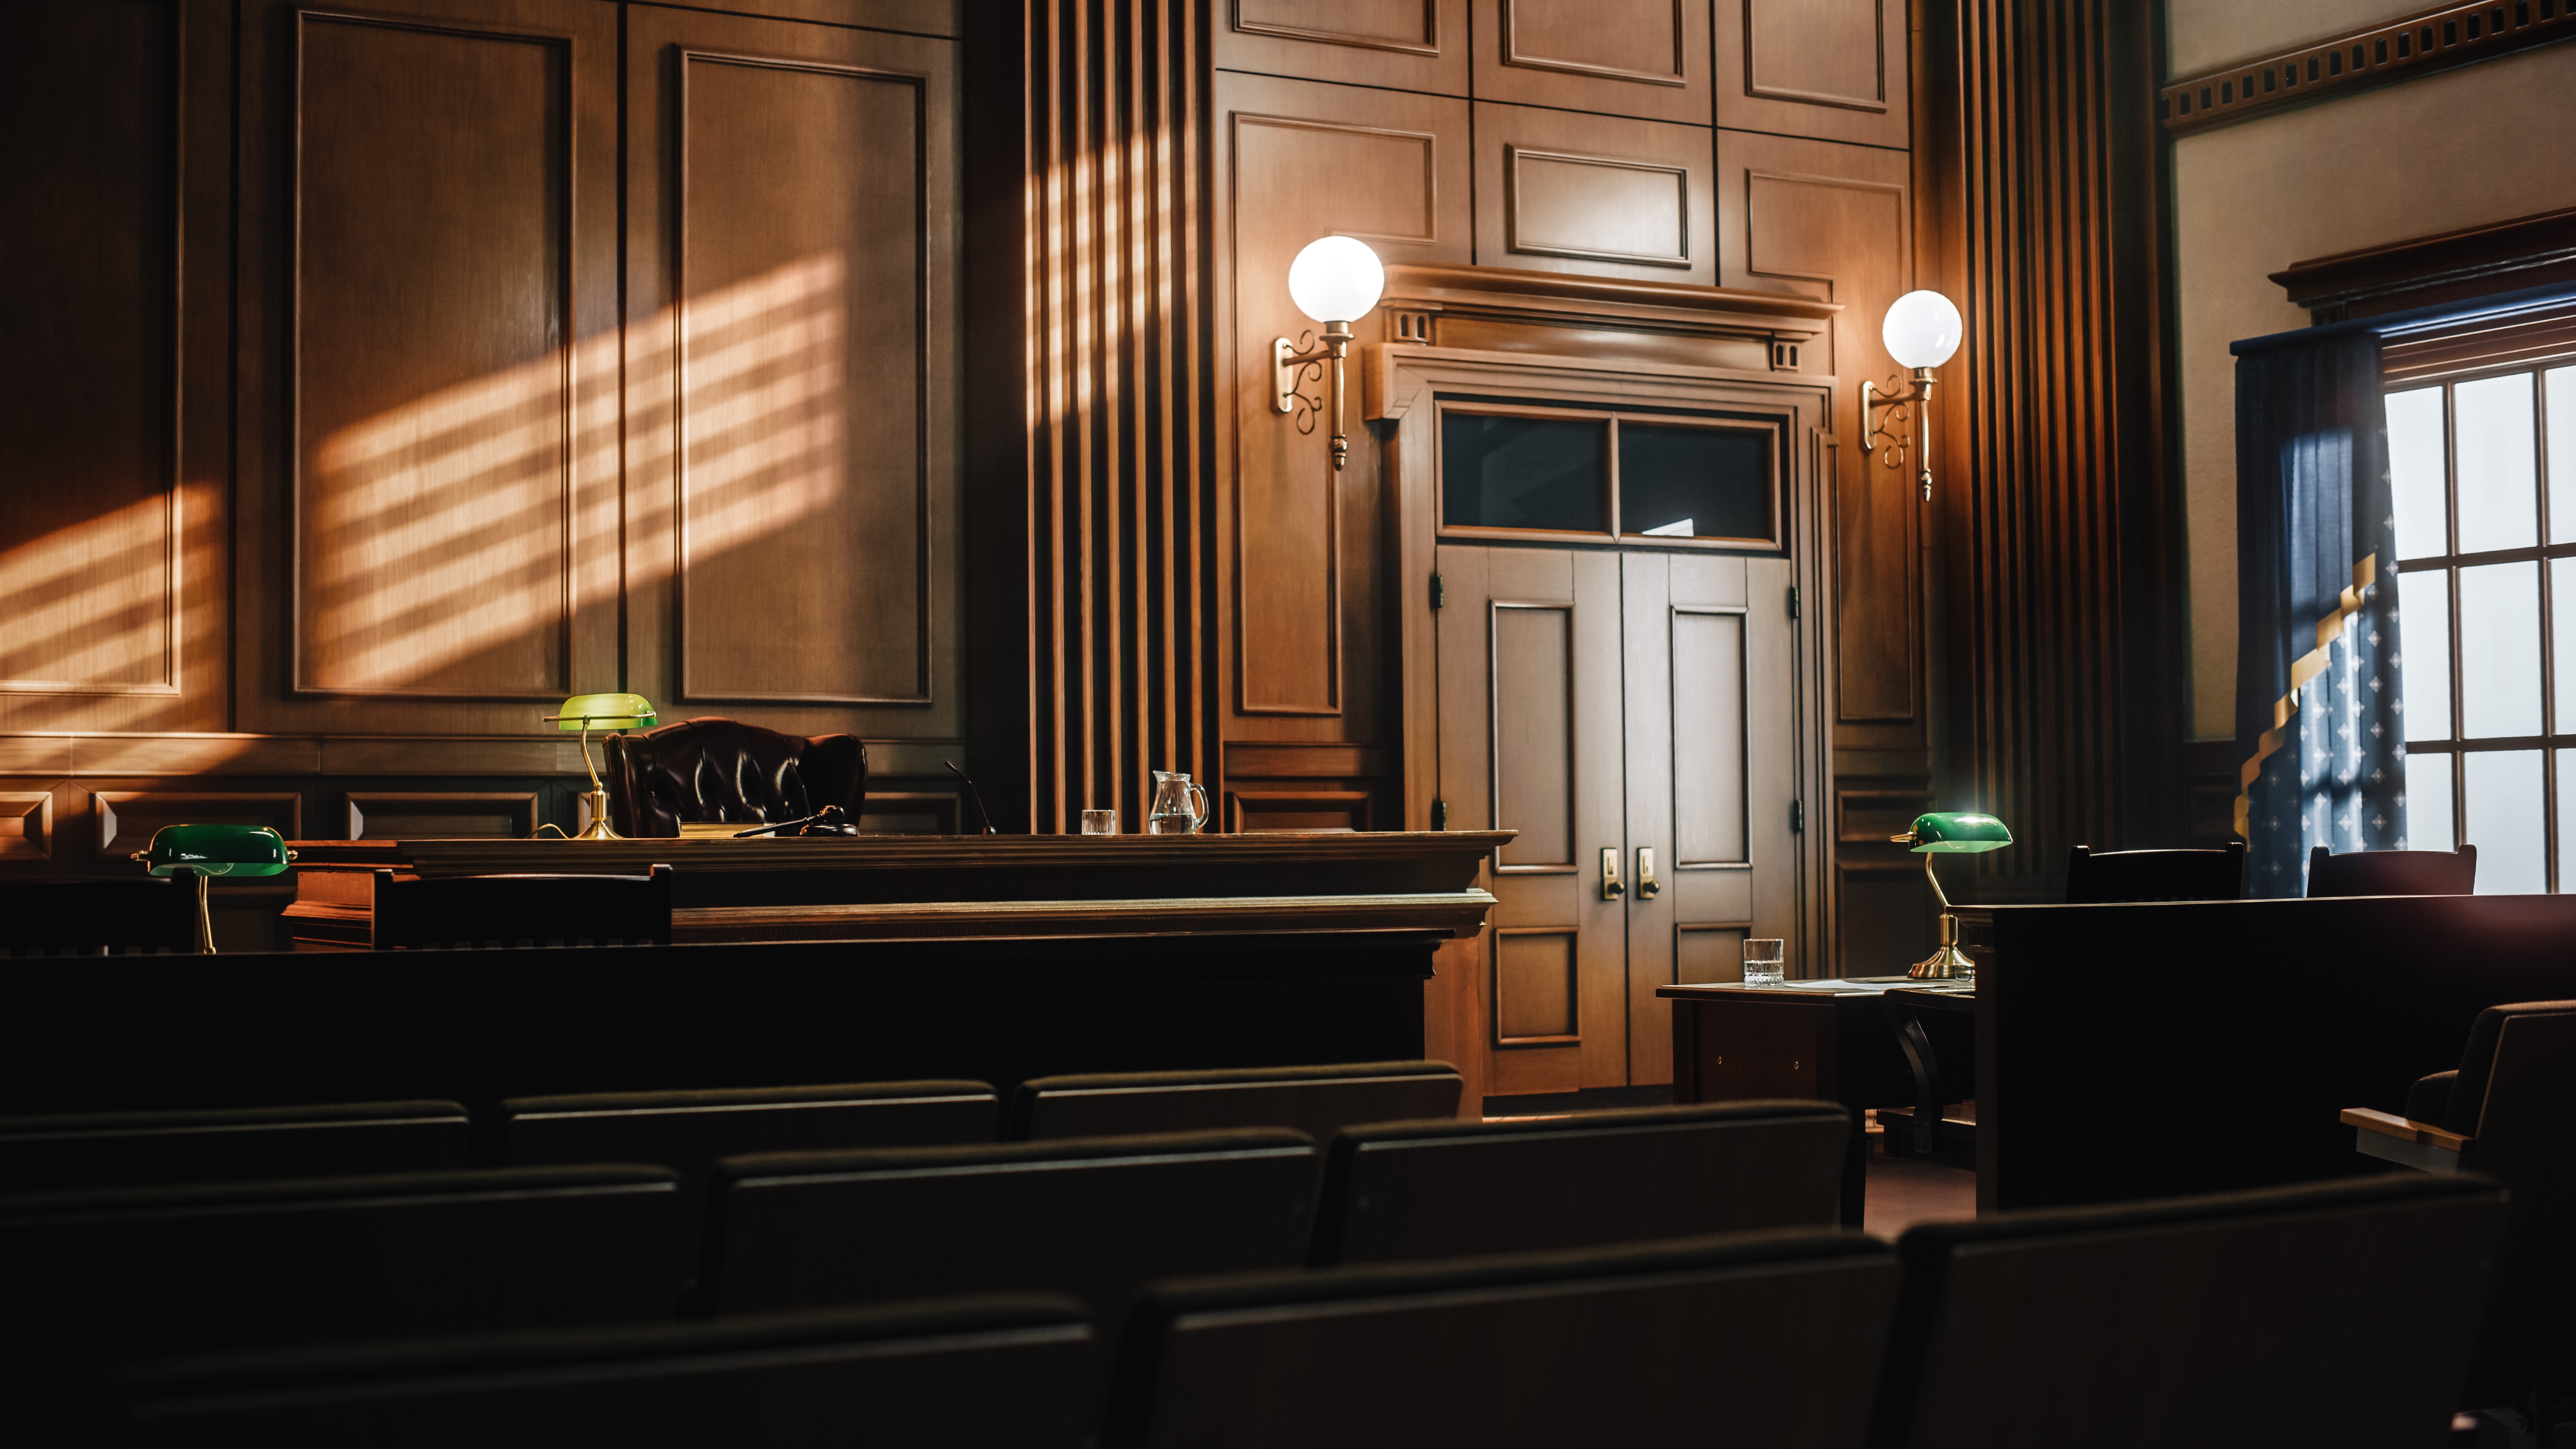 Courtroom | Source: Shutterstock